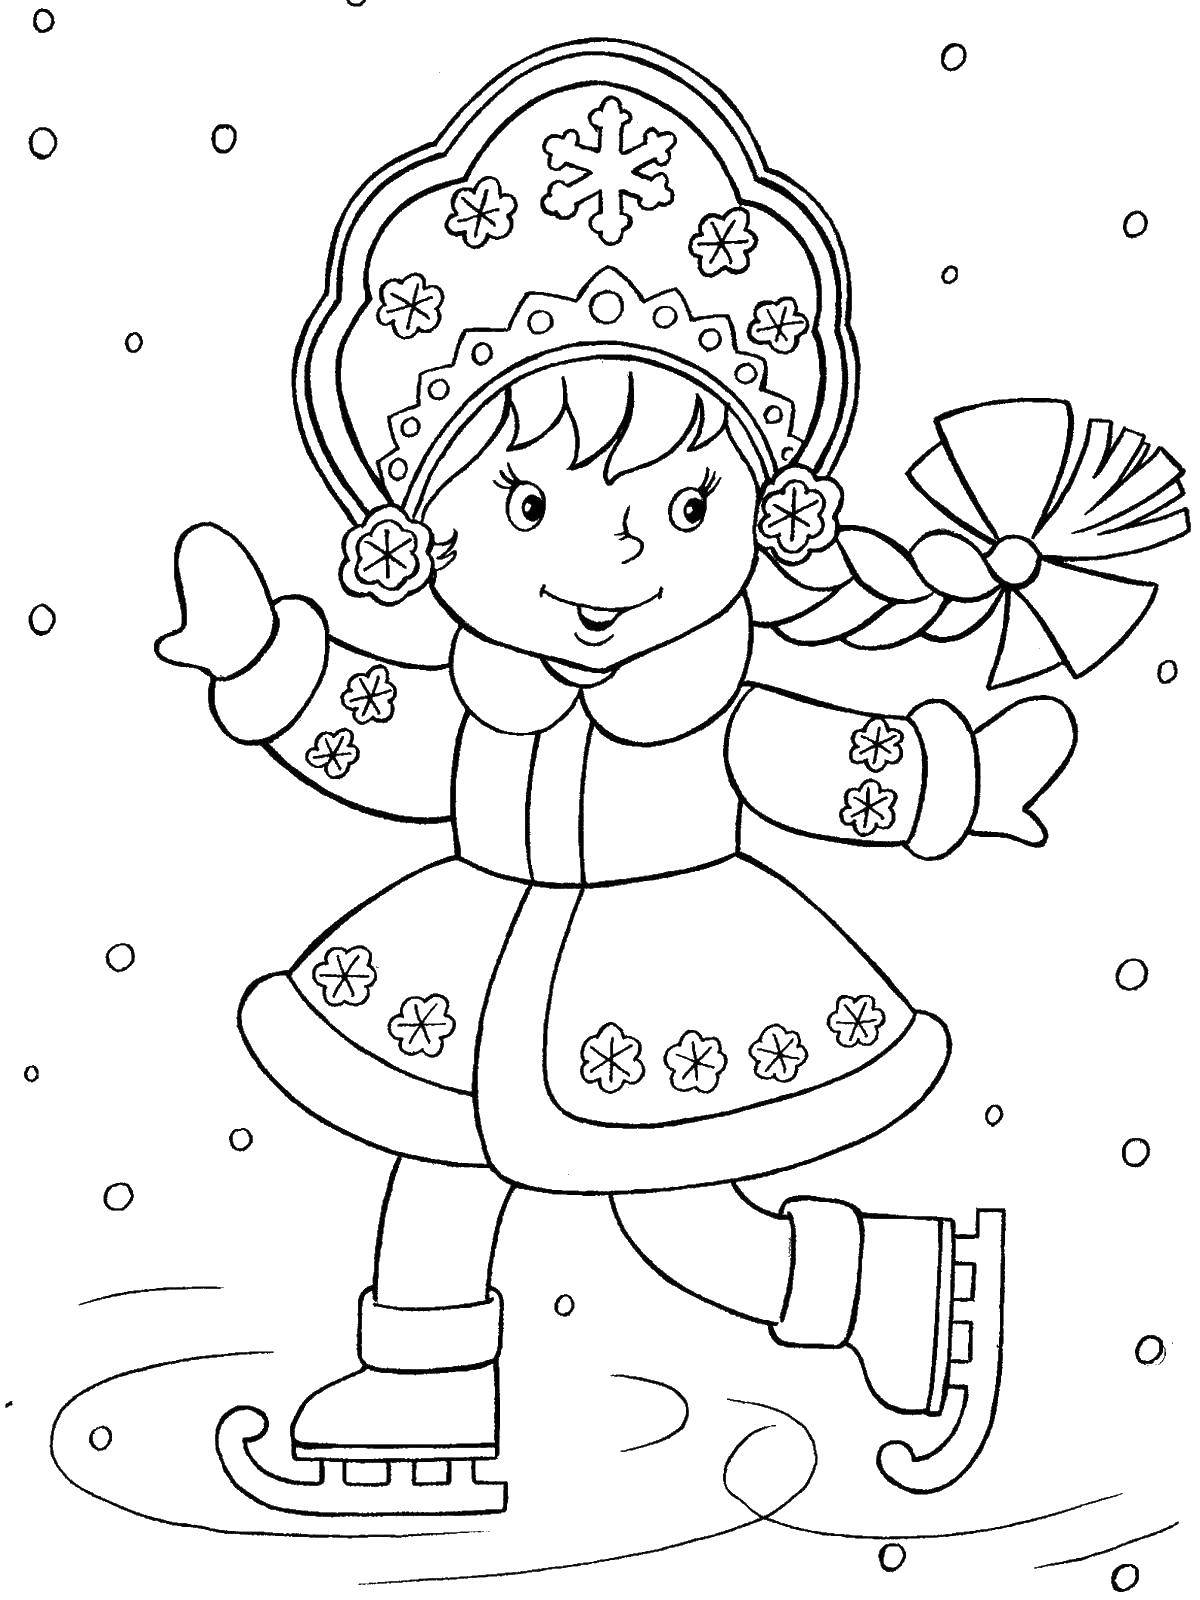 Coloring Maiden. Category coloring pages for girls. Tags:  skating, snow maiden.